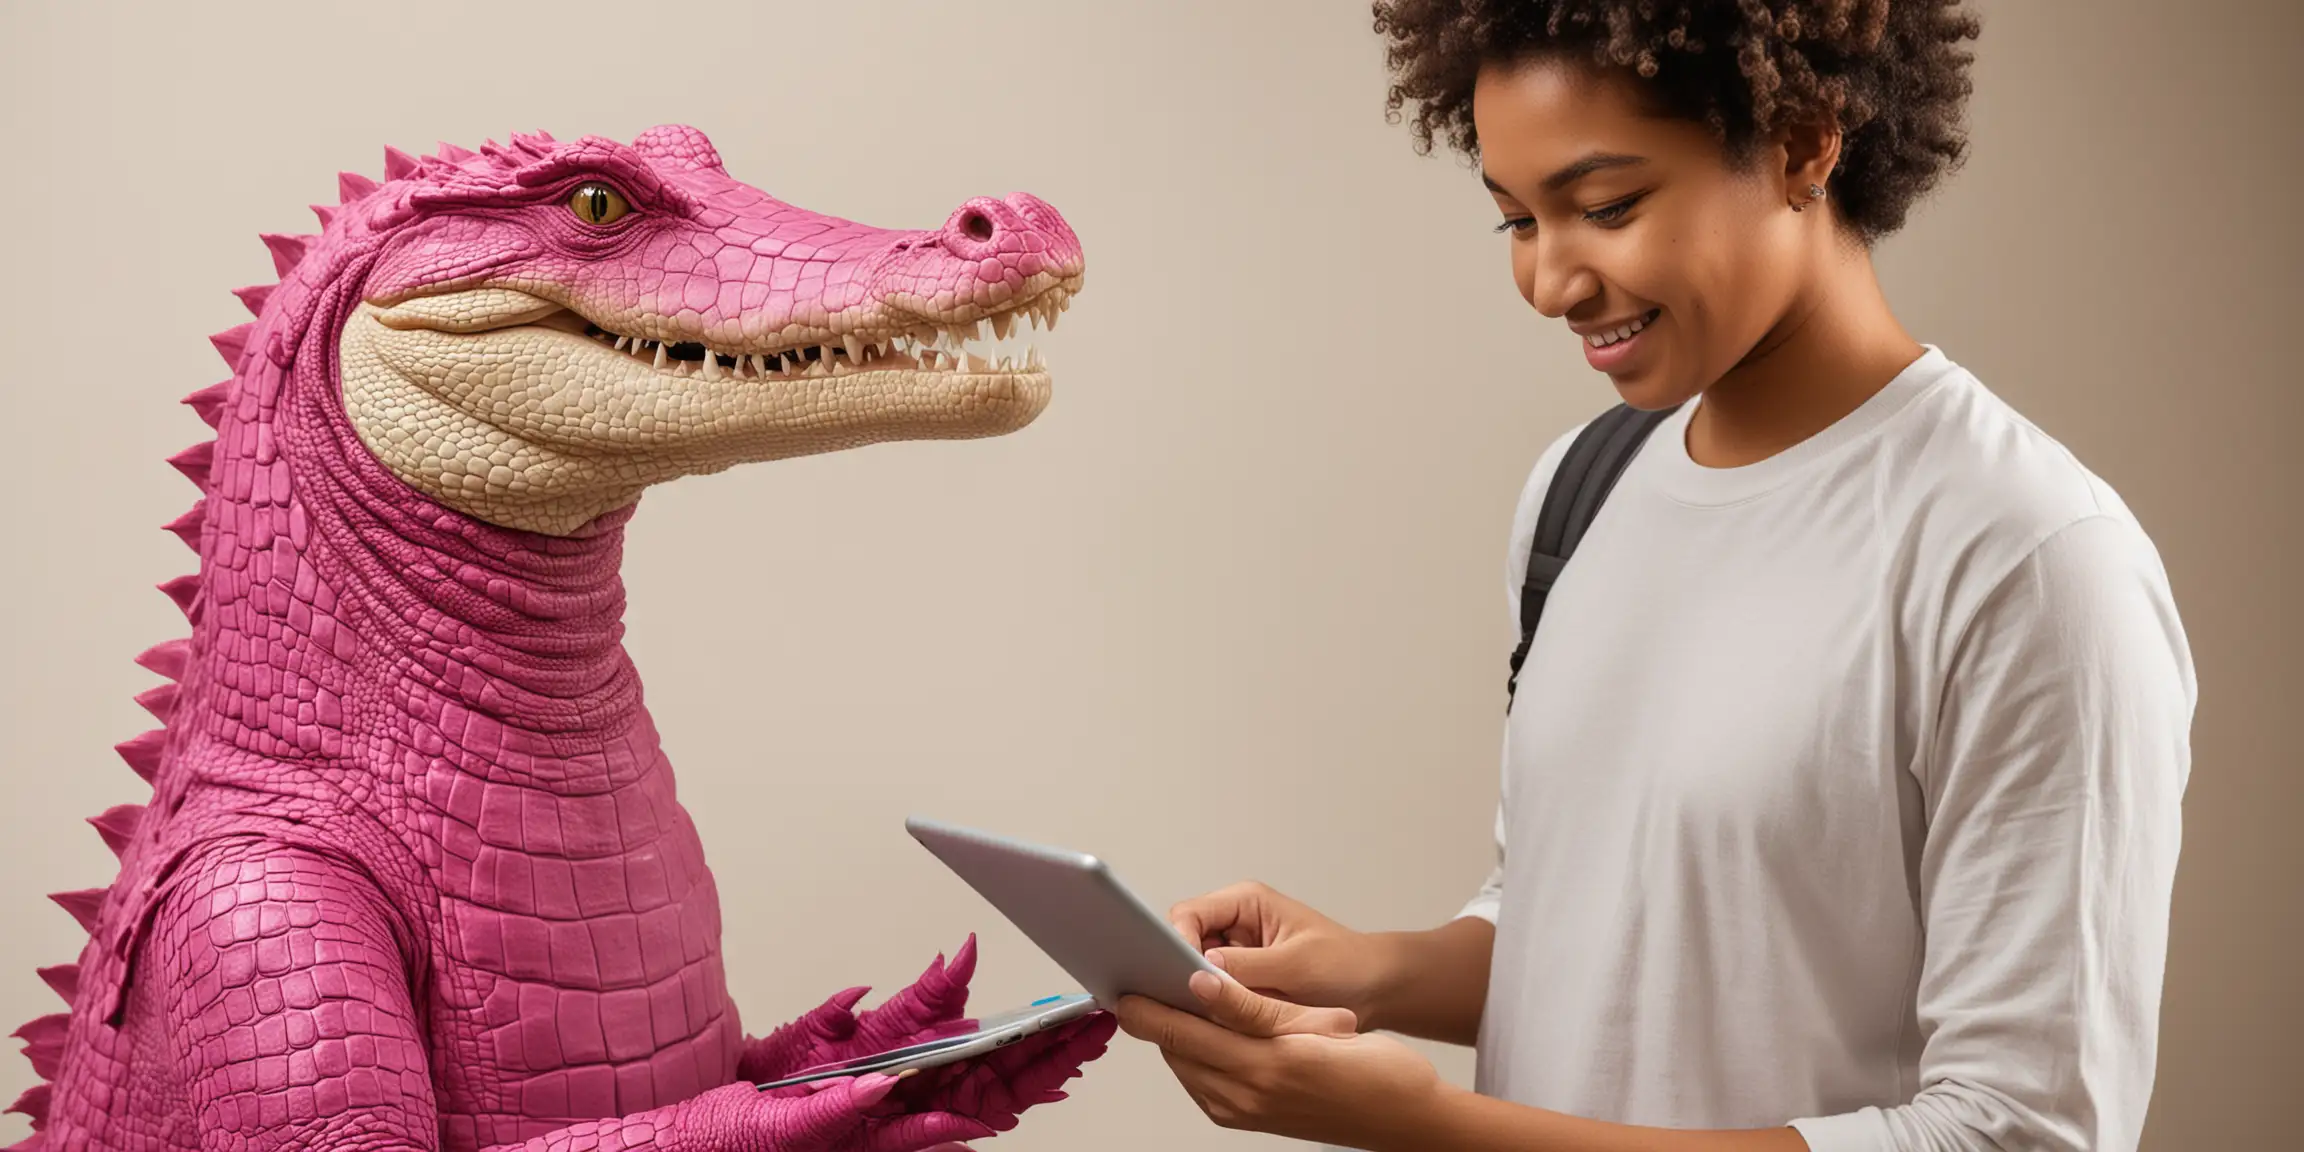 Magenta Crocodile Conducting iPad Questionnaire with College Student